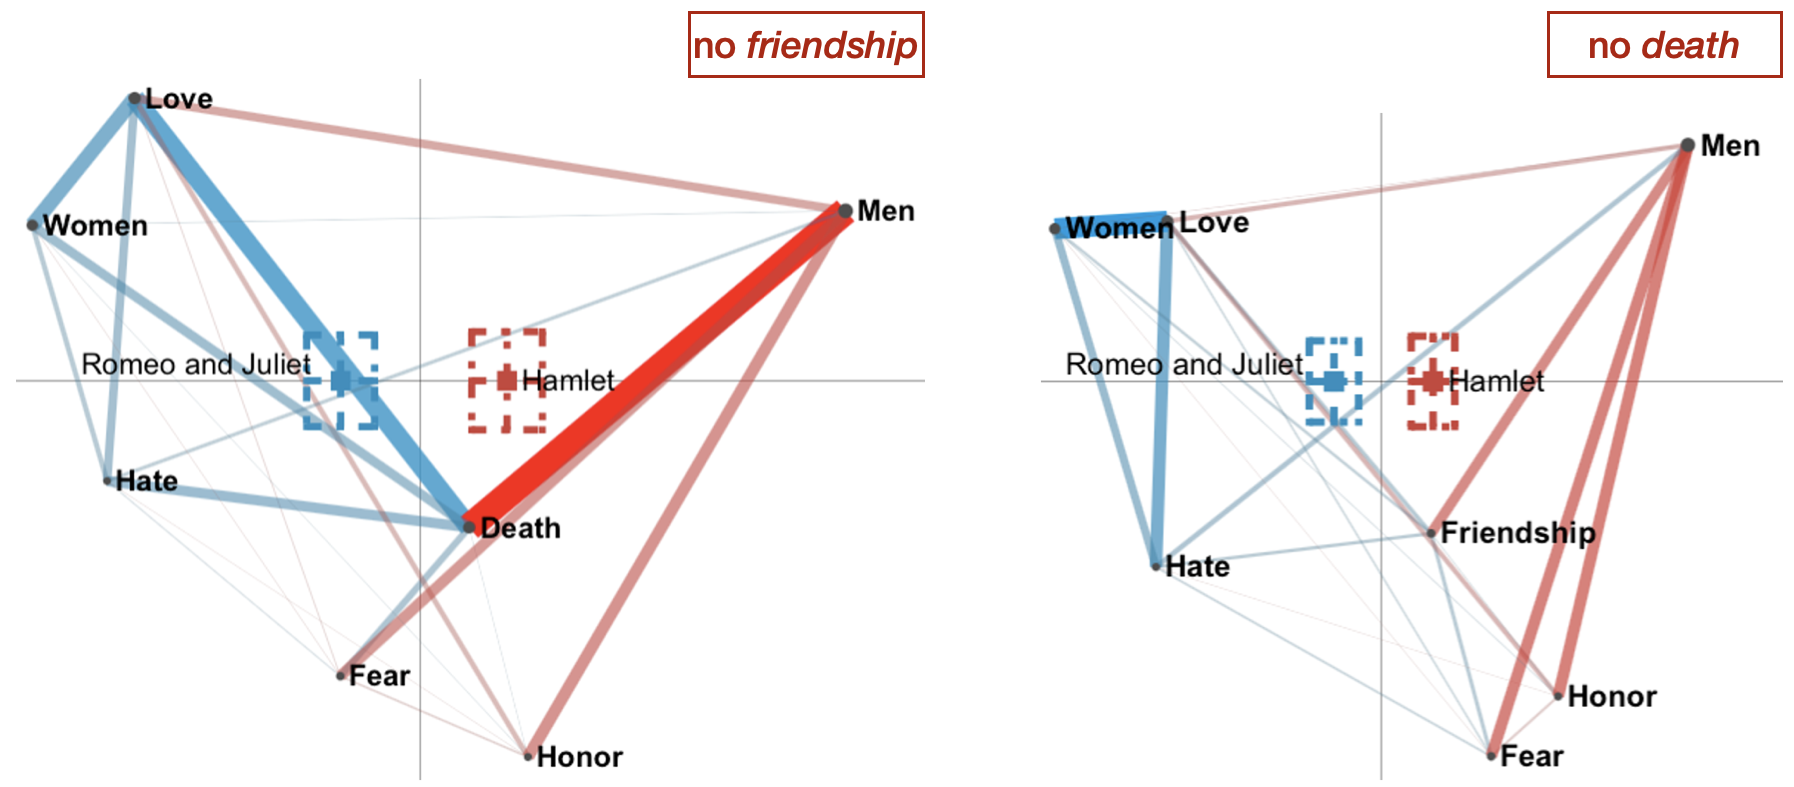 Shakespeare models without *Beauty*, *Pride*, and *Death* or *Friendship*